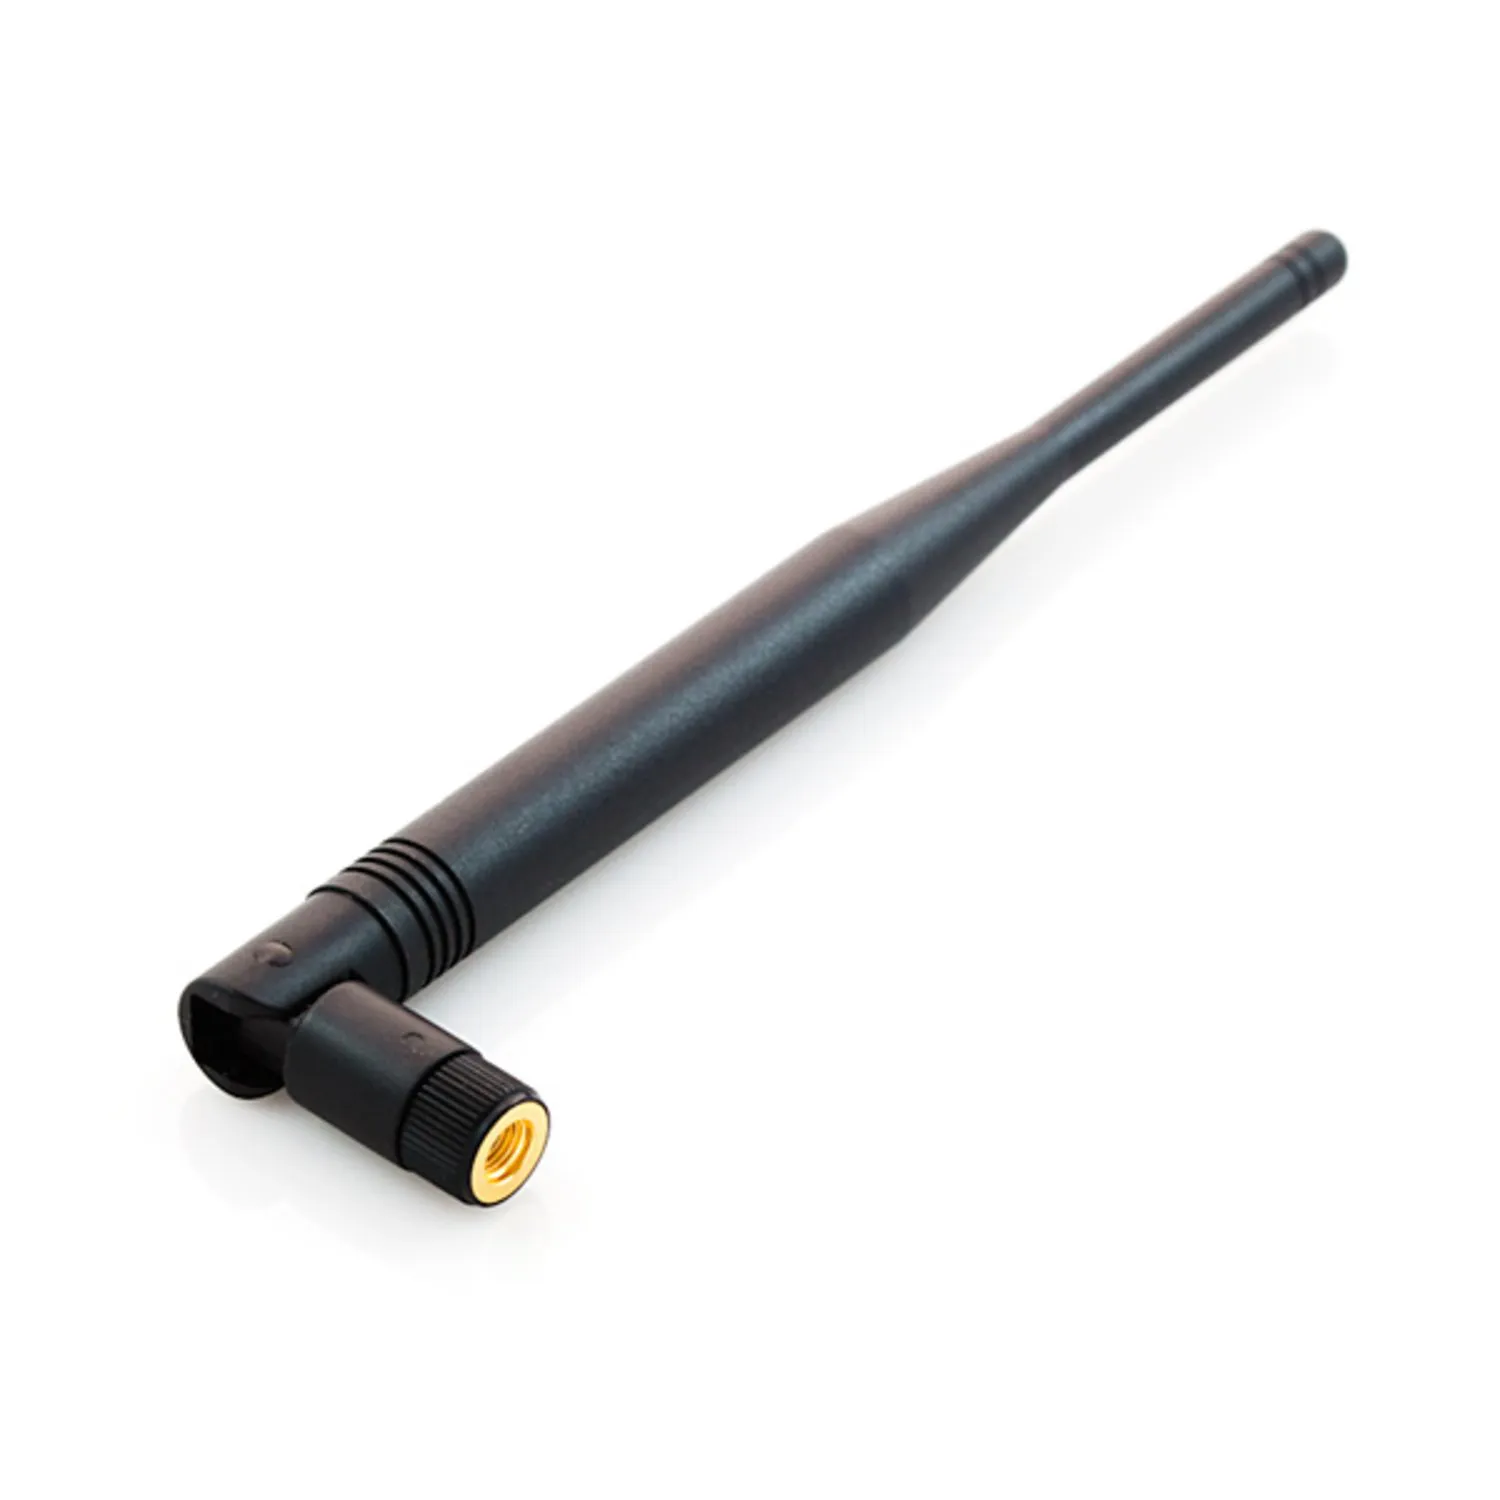 Photo of 2.4GHz Duck Antenna RP-SMA - Large